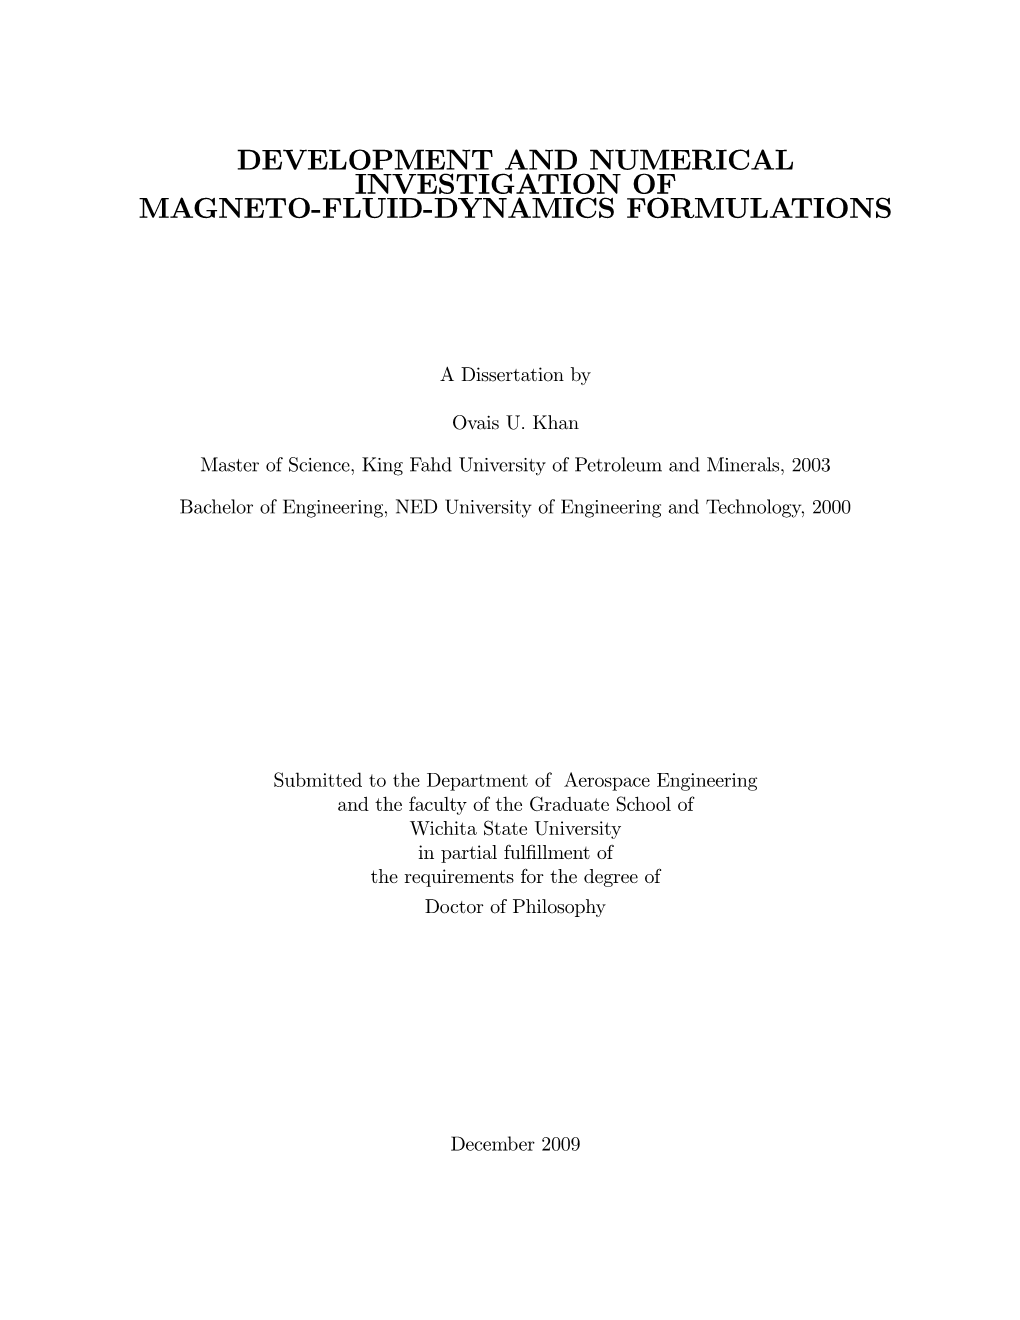 Development and Numerical Investigation of Magneto-Fluid-Dynamics Formulations